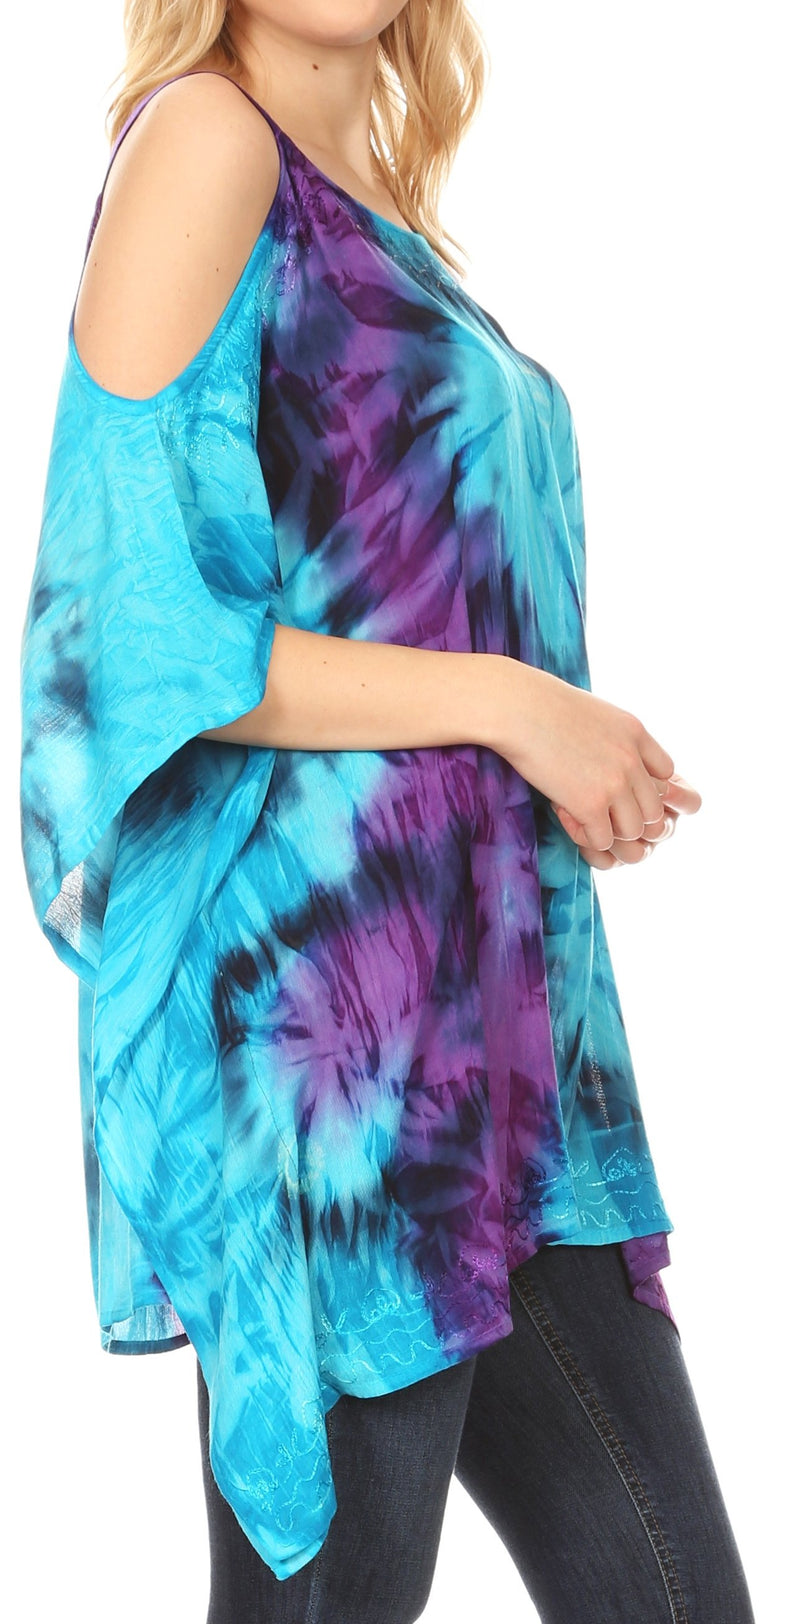 Sakkas Lucia Women's Tie Dye Embroidered Cold Shoulder Loose Tunic Blouse Top Tank